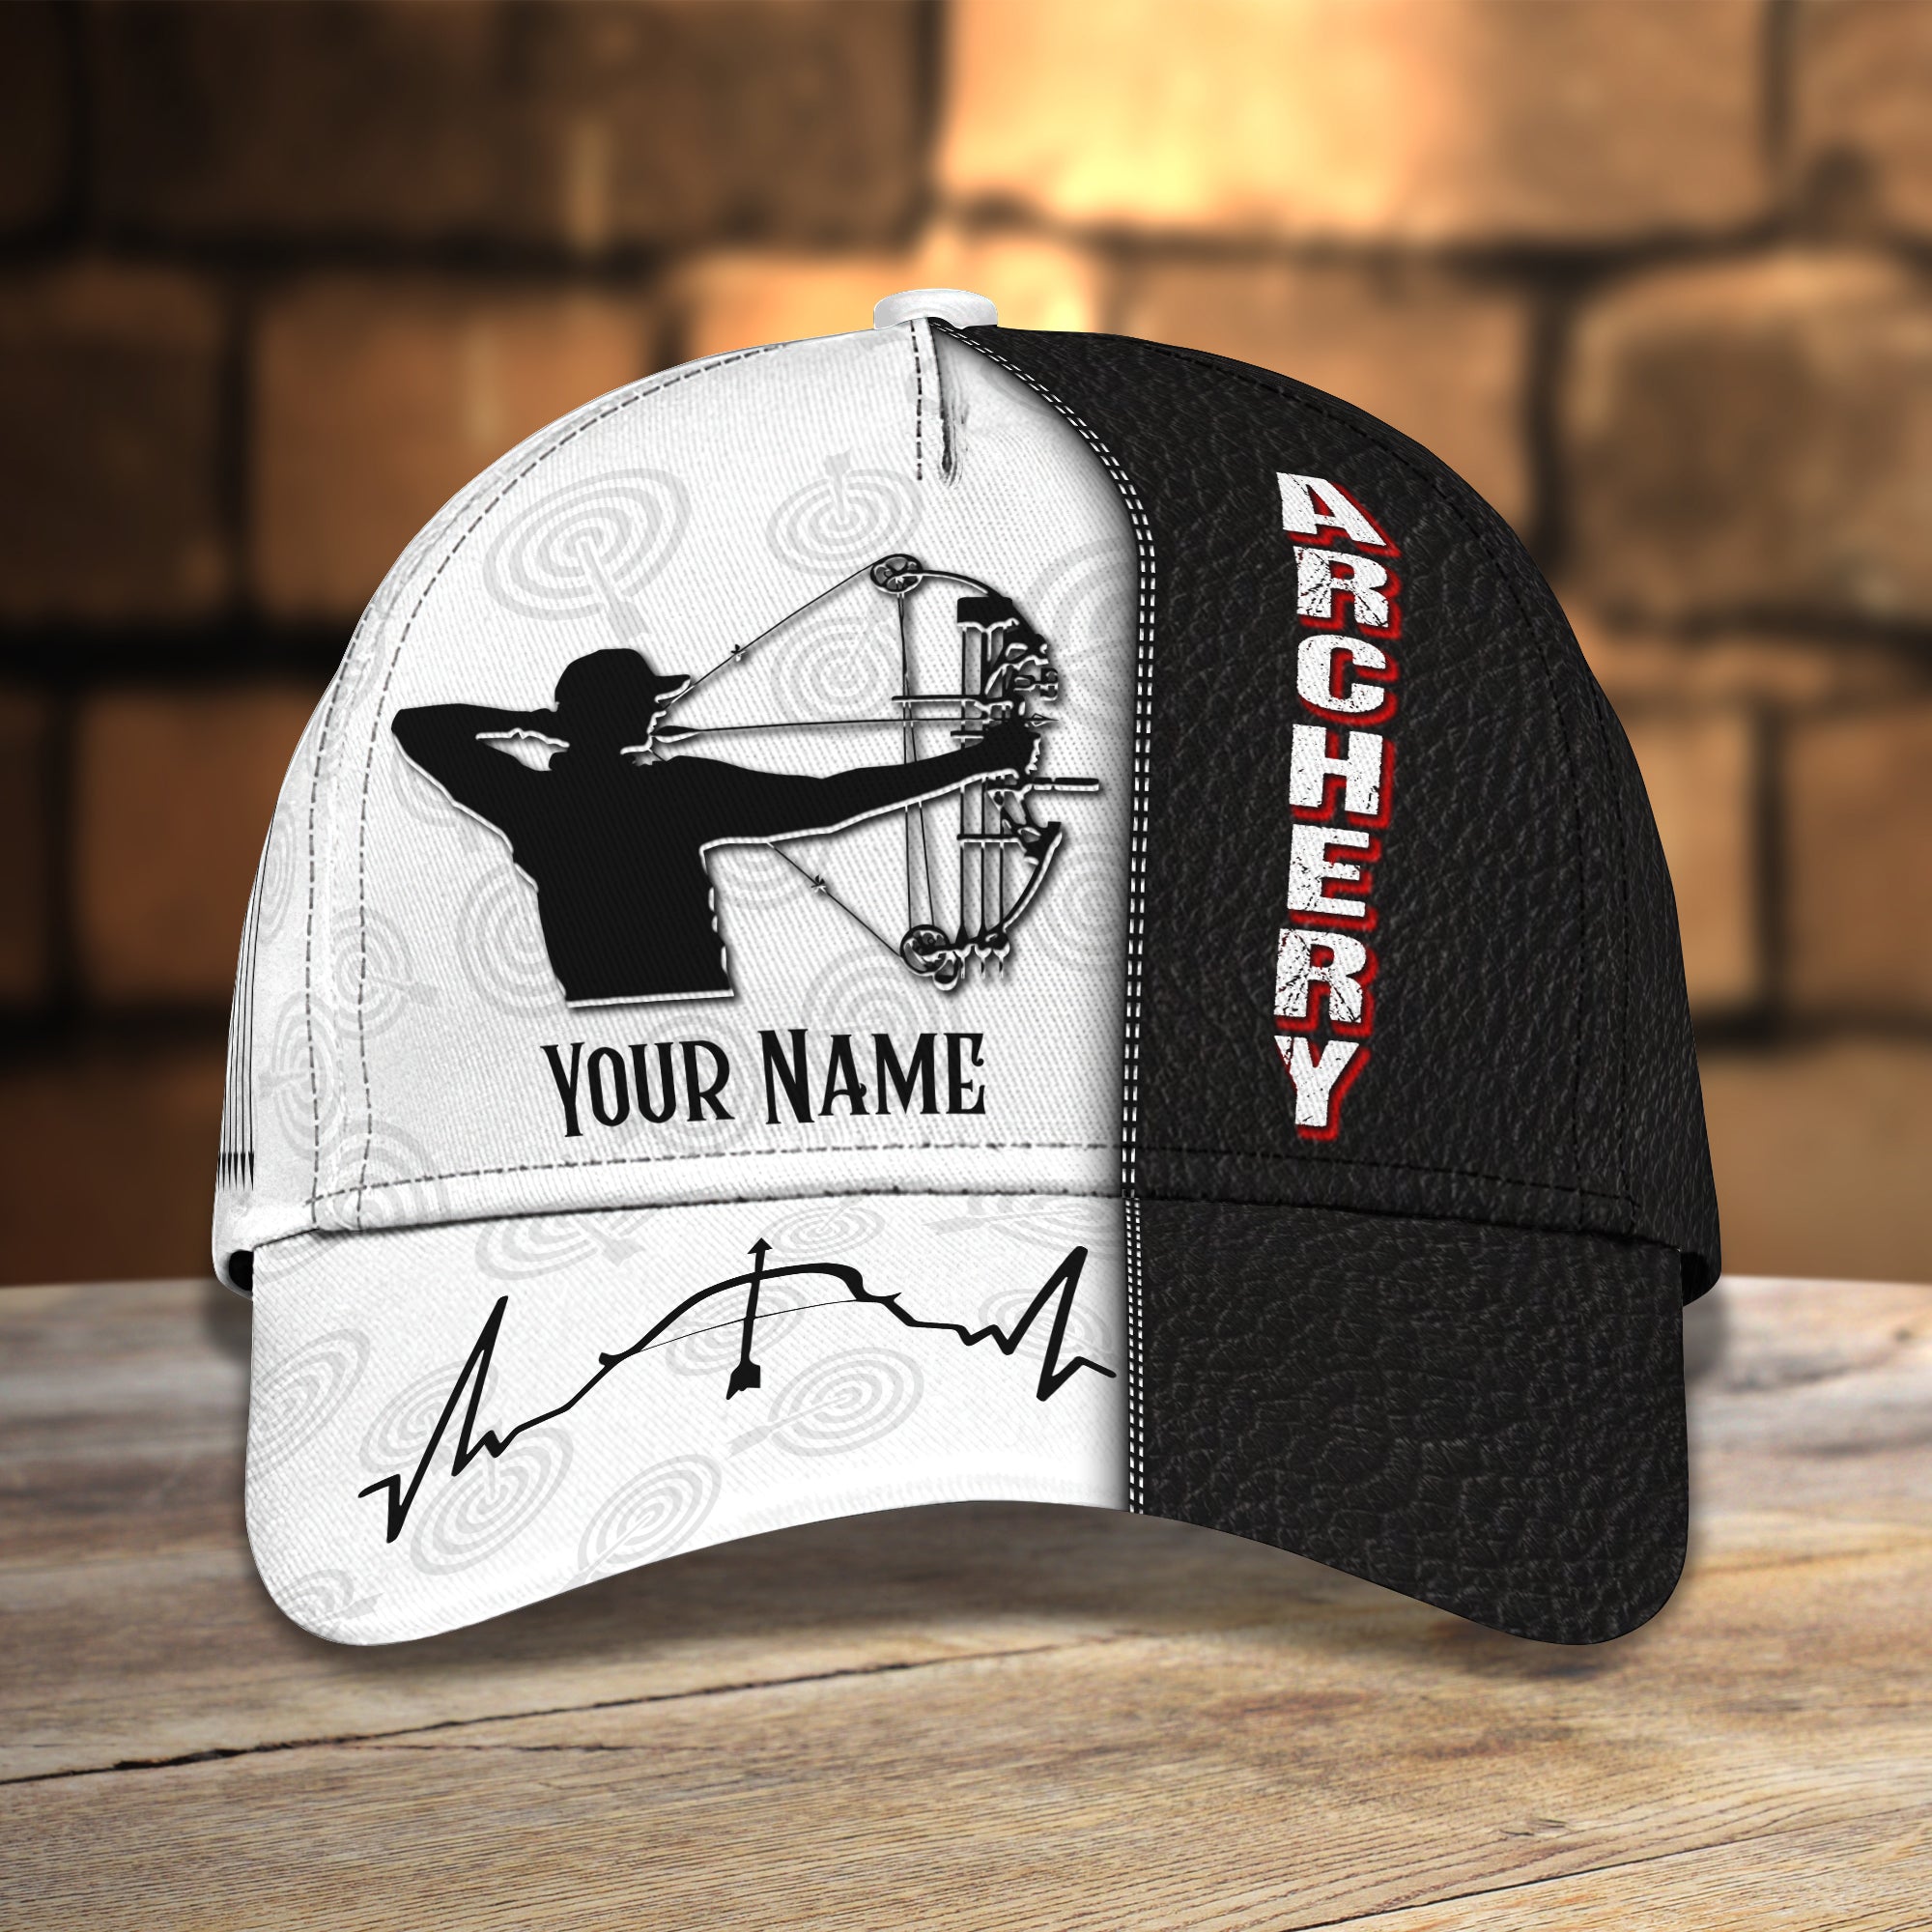 Archery Personalized Name Cap 77 - Nvc97